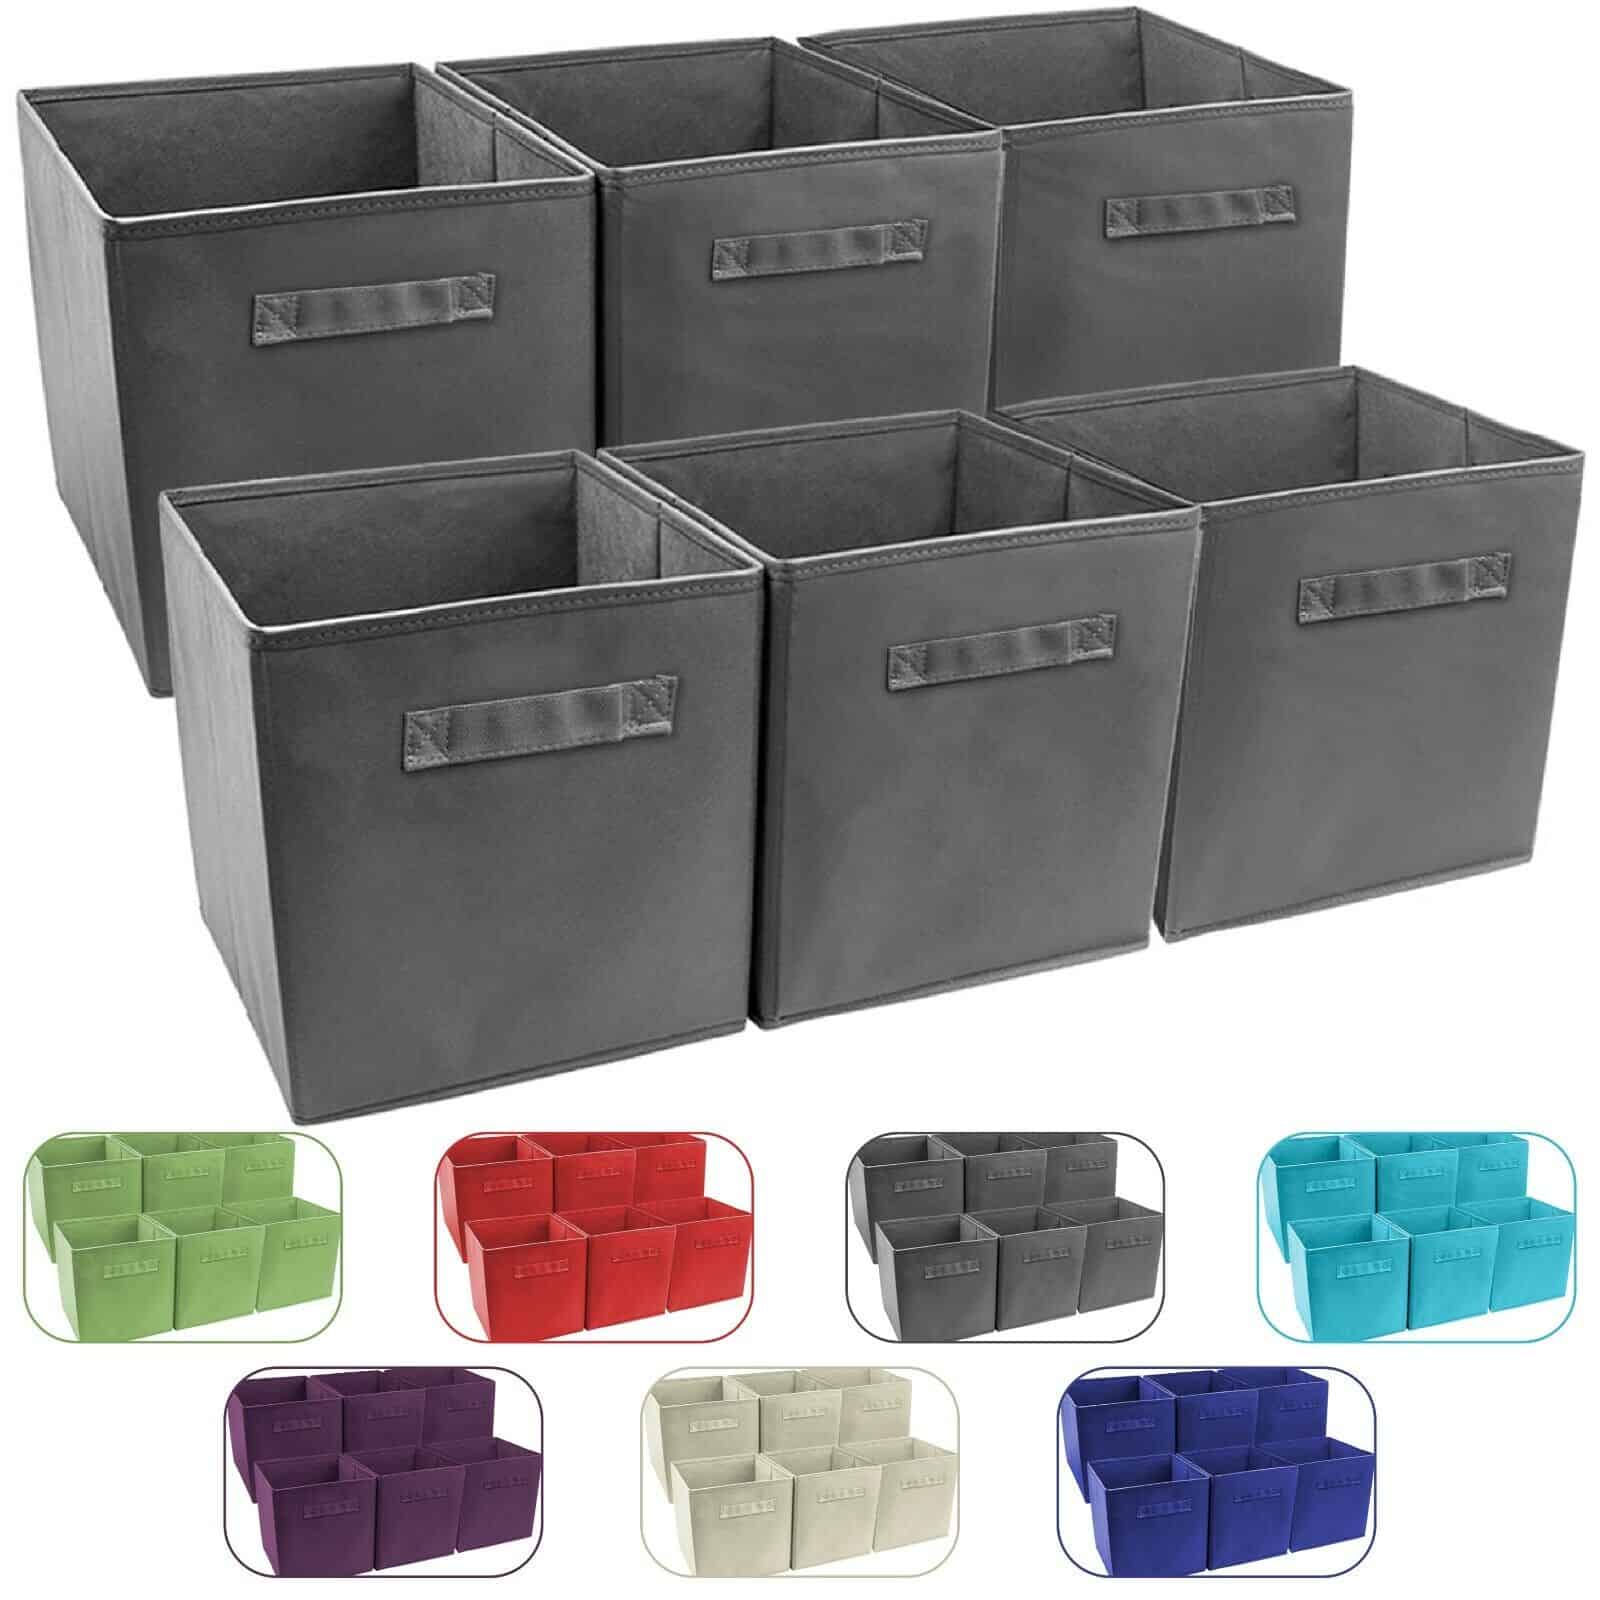 A set of six storage bins in different colors.